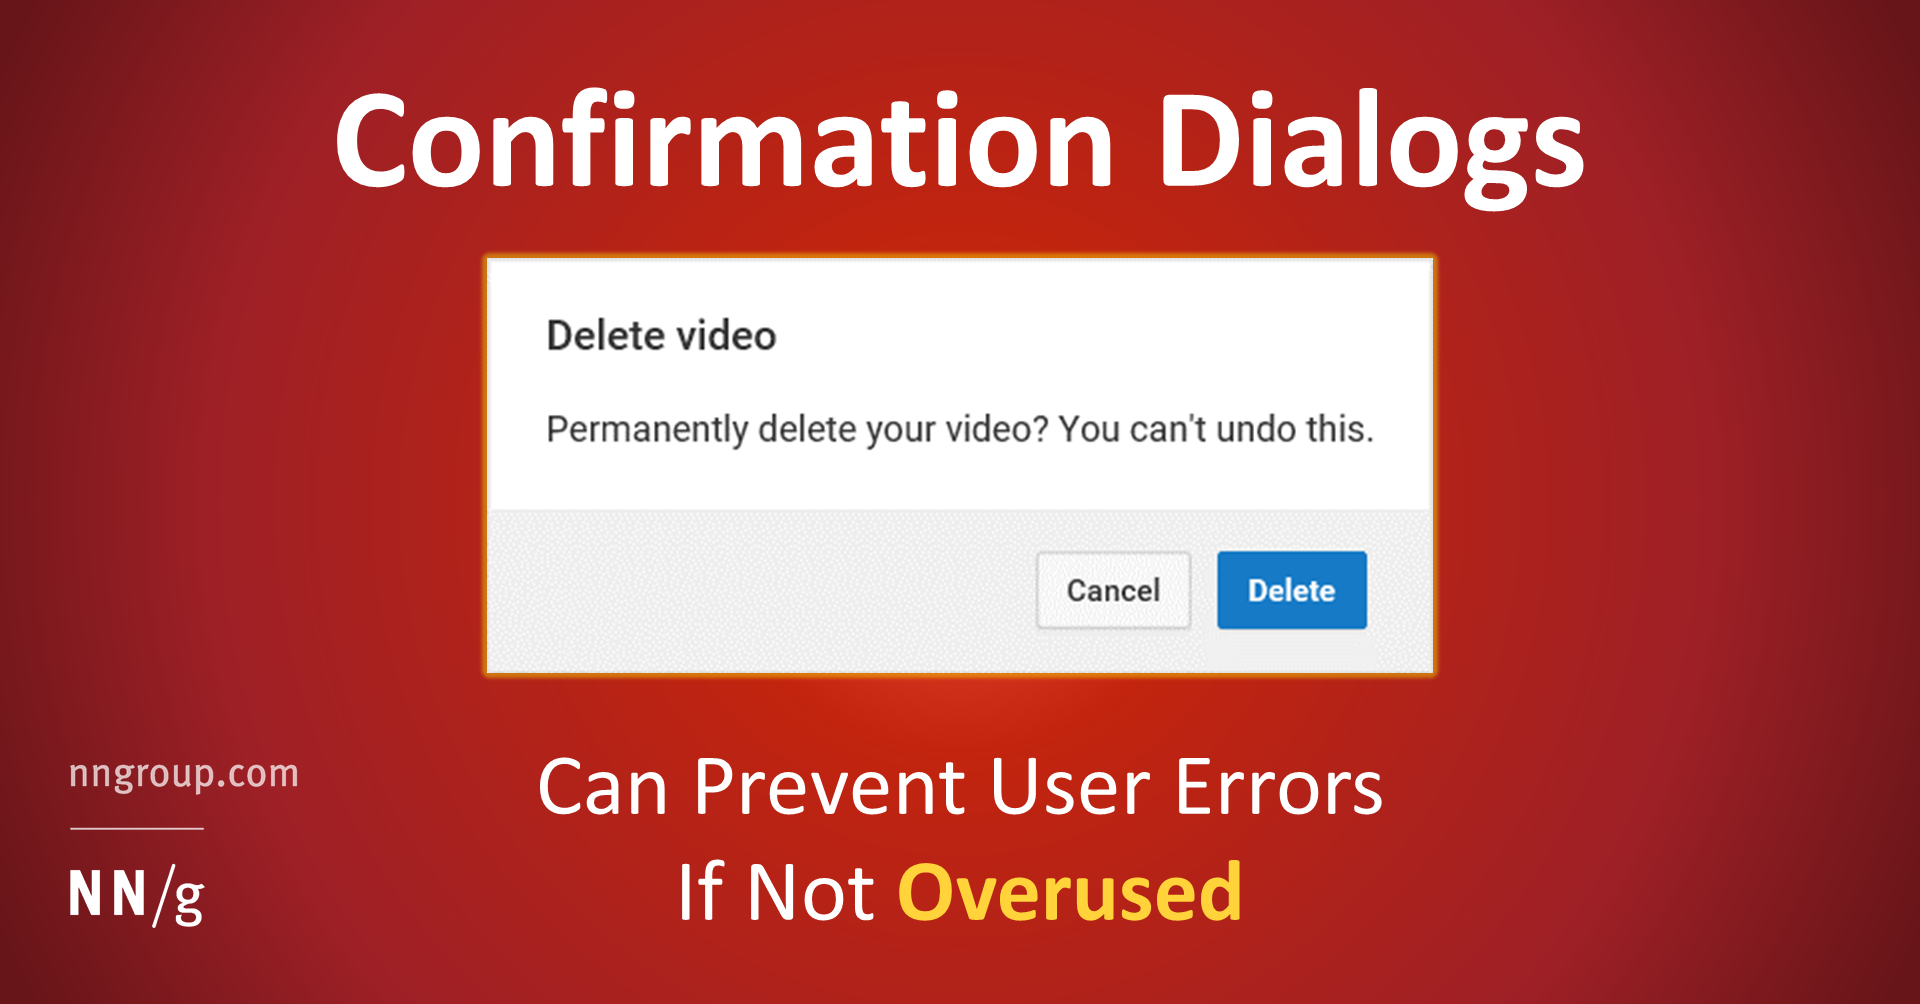 Confirmation Dialogs Can Prevent User Errors (If Not Overused)